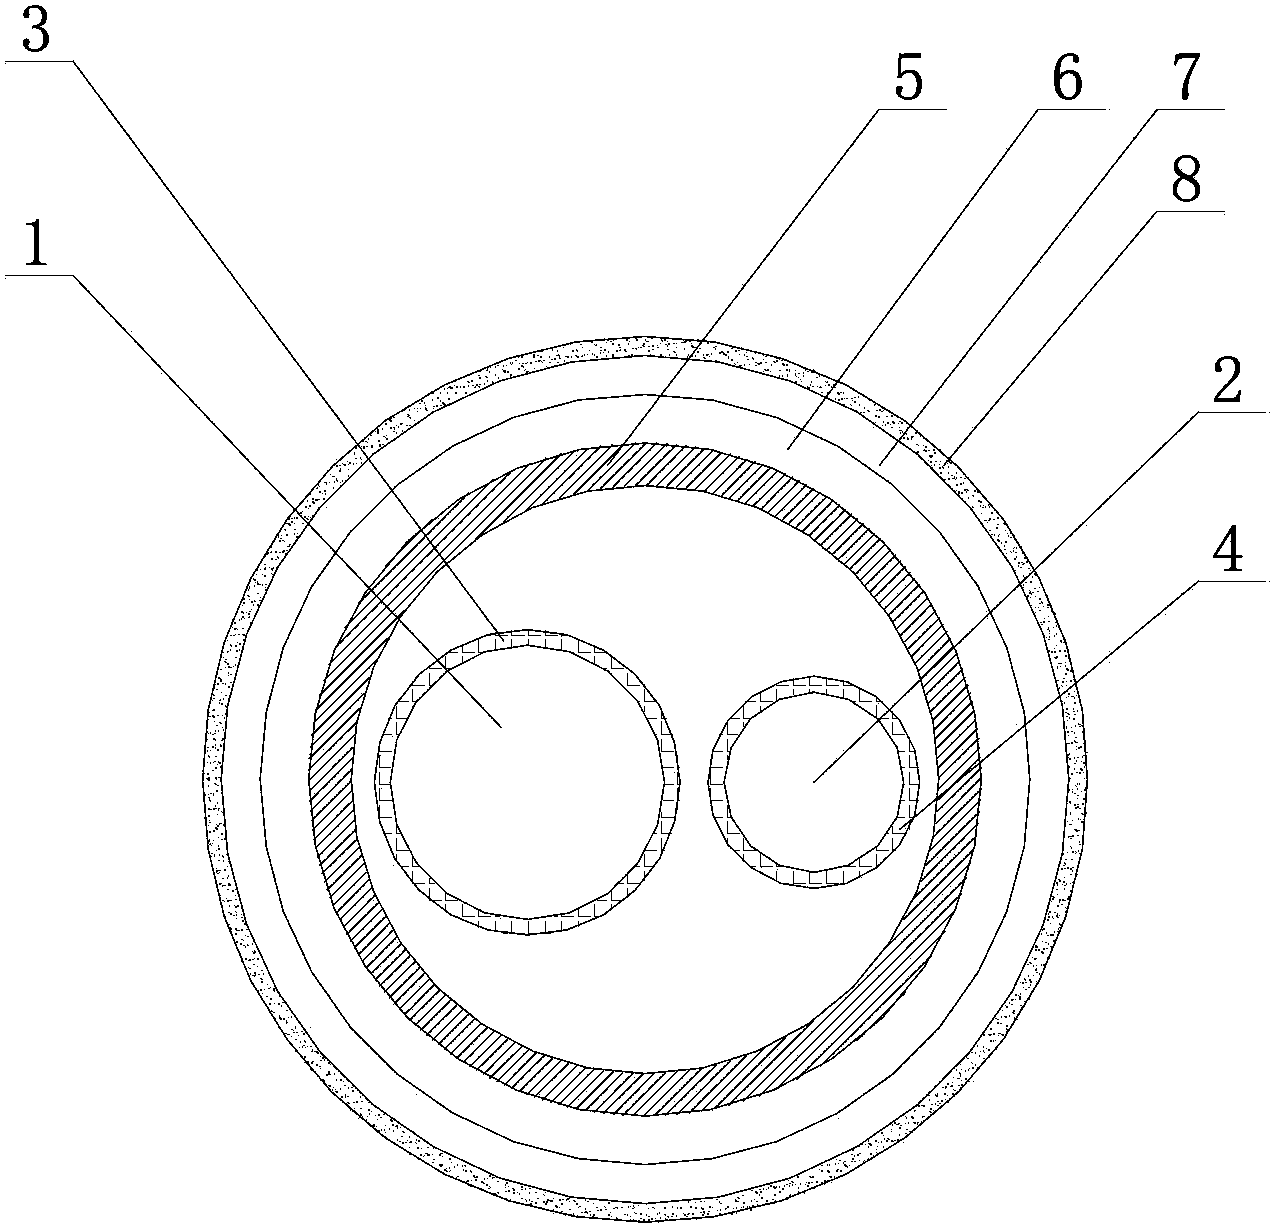 Radiation-resistant composite shielded nuclear power twin-core control cable